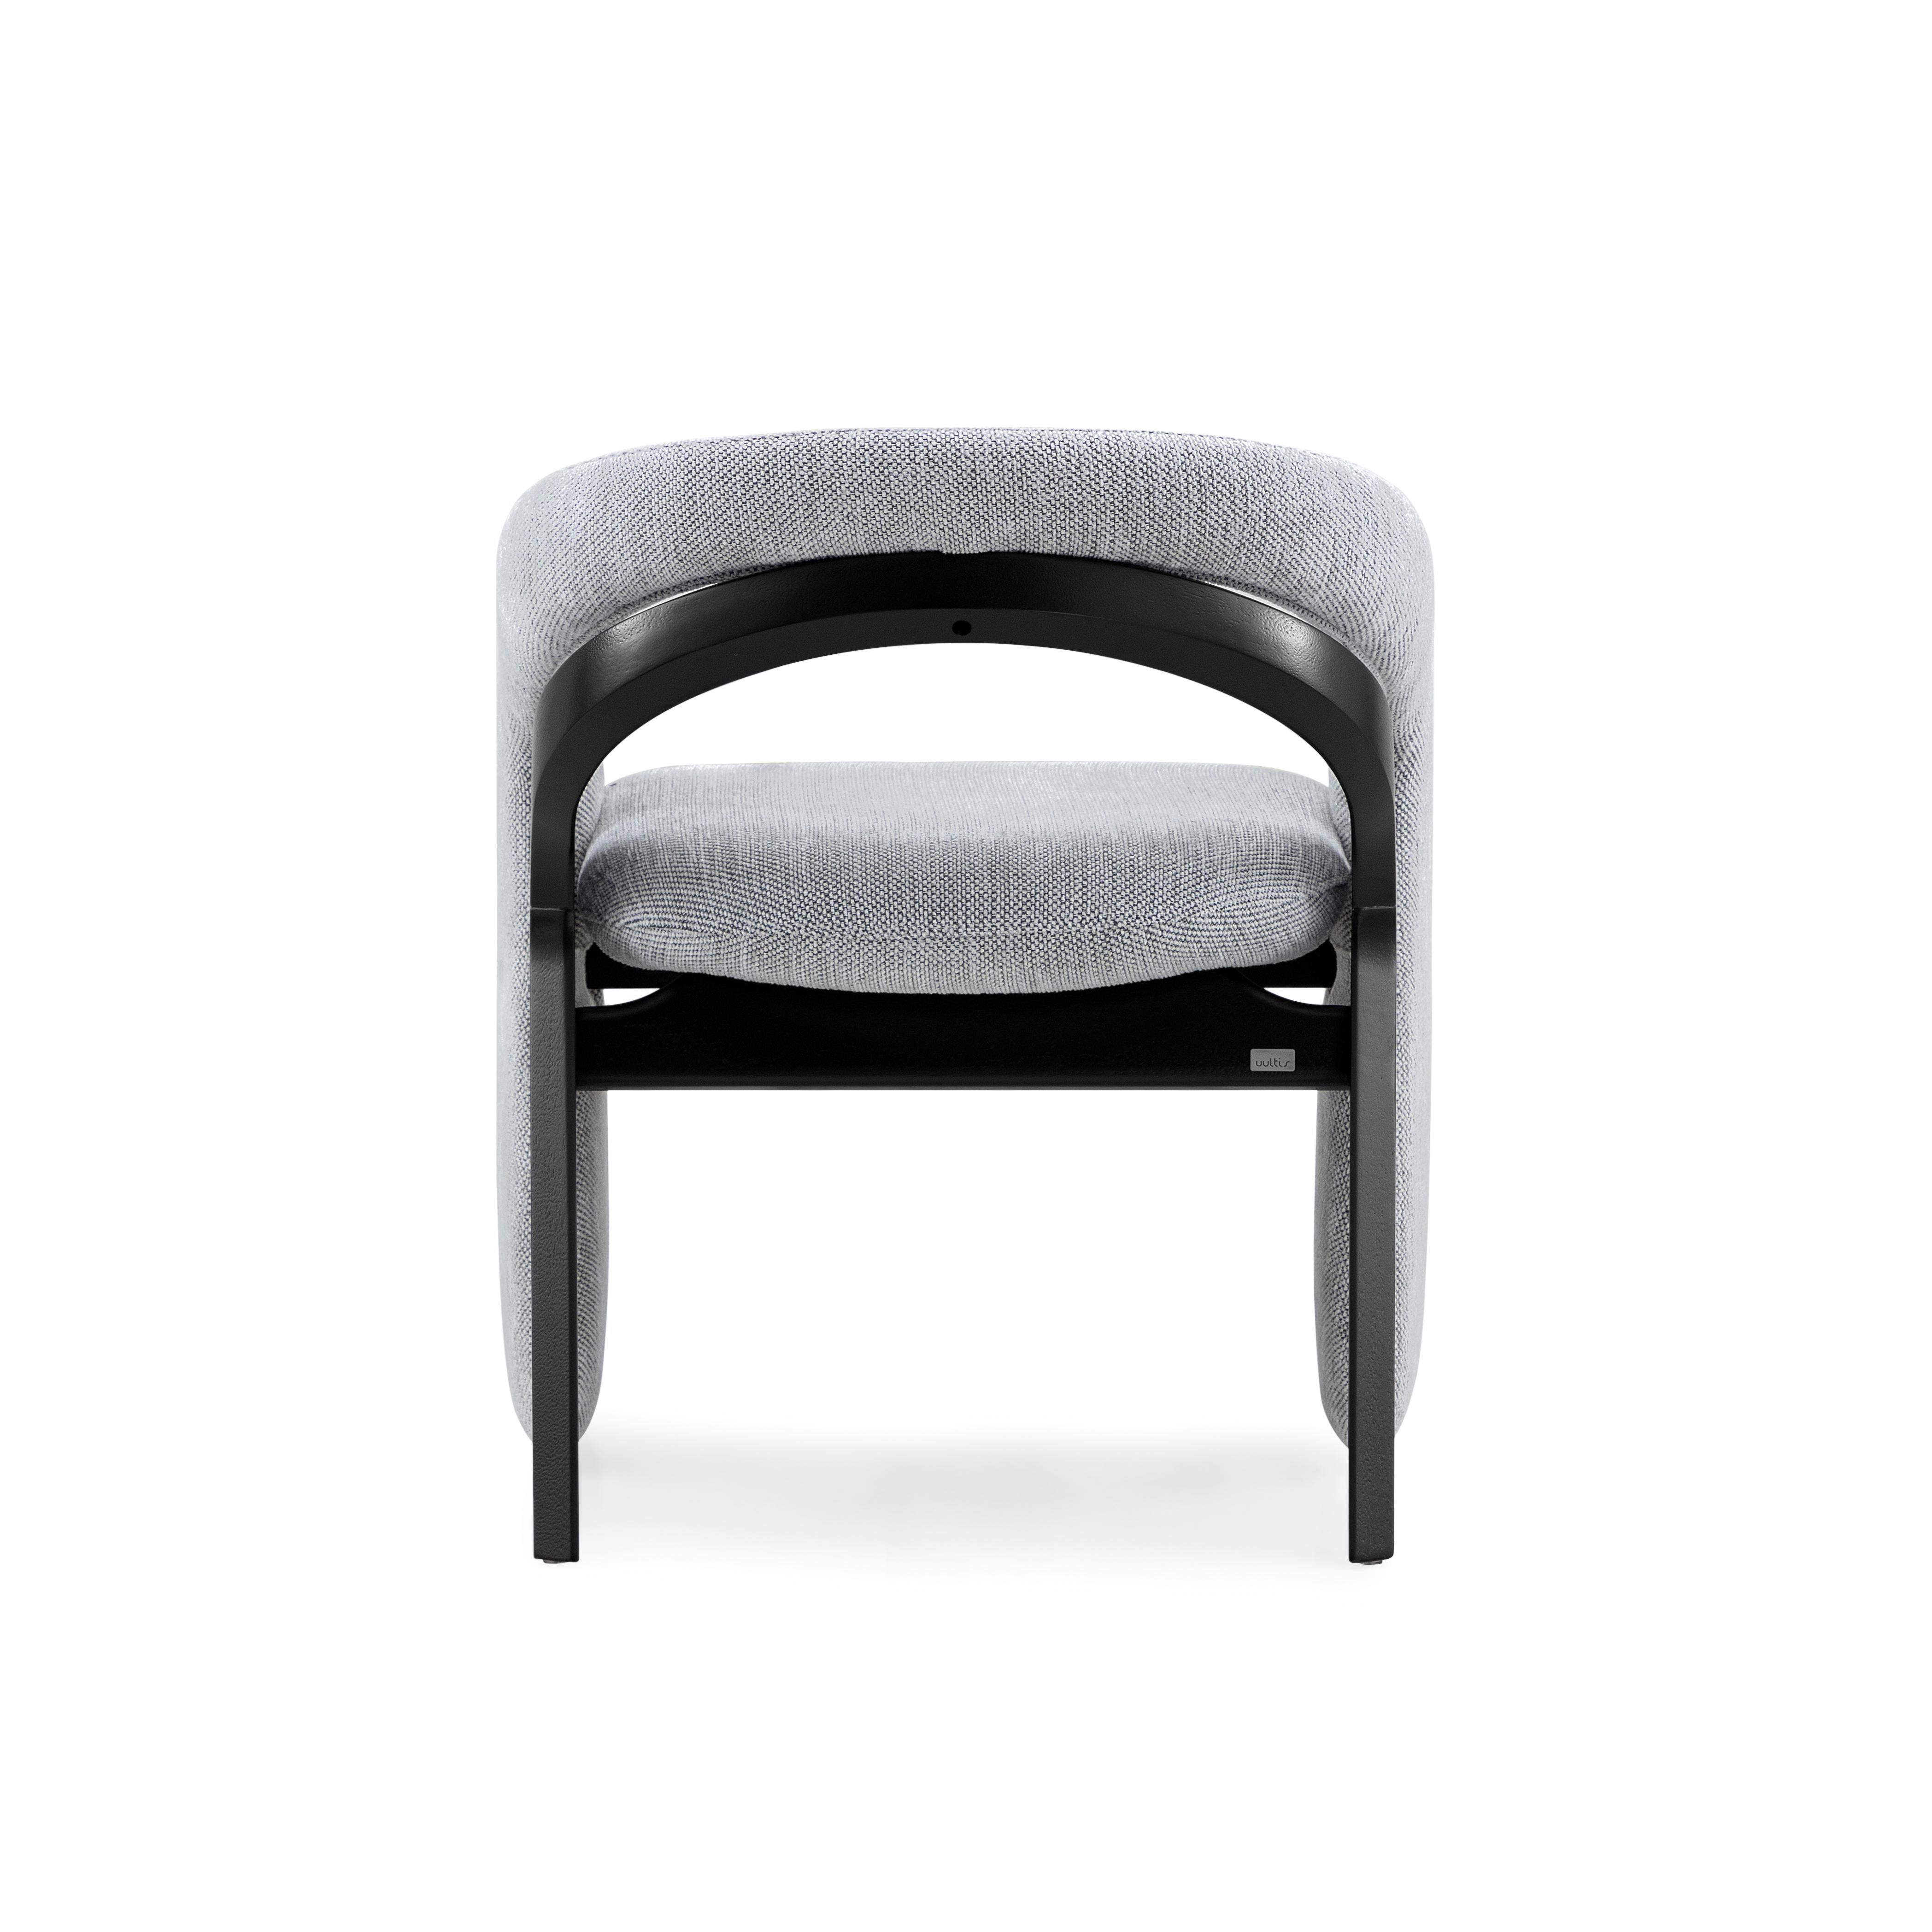 Olga Dining Chair in Black Wood Finish and Gray Fabric In New Condition For Sale In Miami, FL